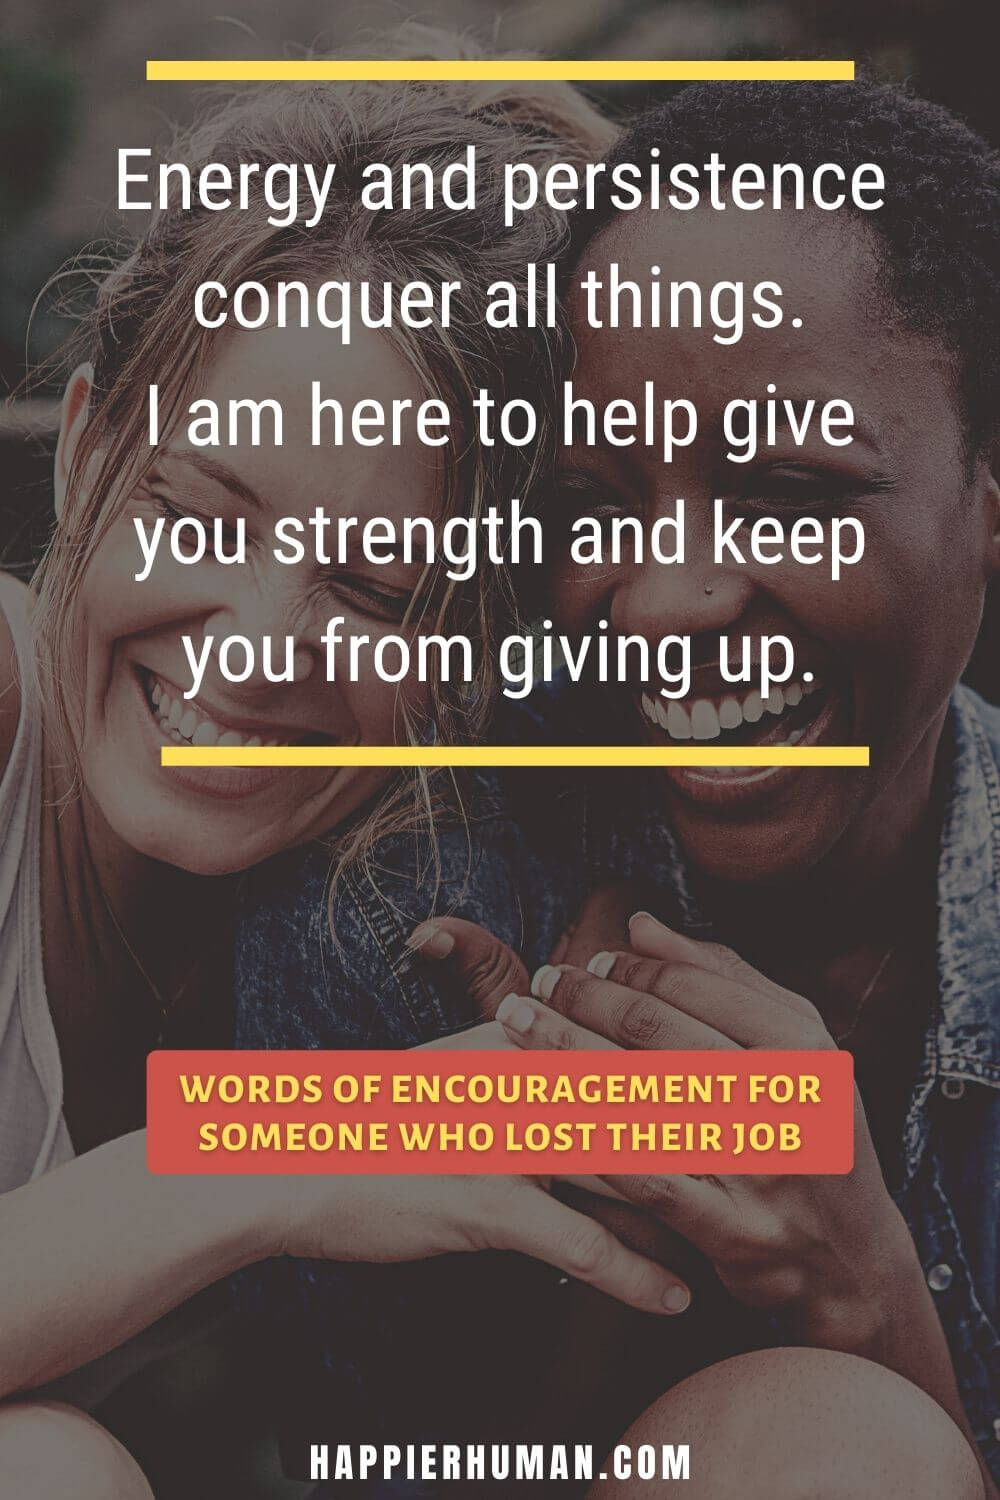 Words of Encouragement for Someone Who Lost Their Job - Energy and persistence conquer all things. I am here to help give you strength and keep you from giving up. | what to say when someone closes their business | words of encouragement for someone who lost a loved one | how to encourage a friend who lost his job